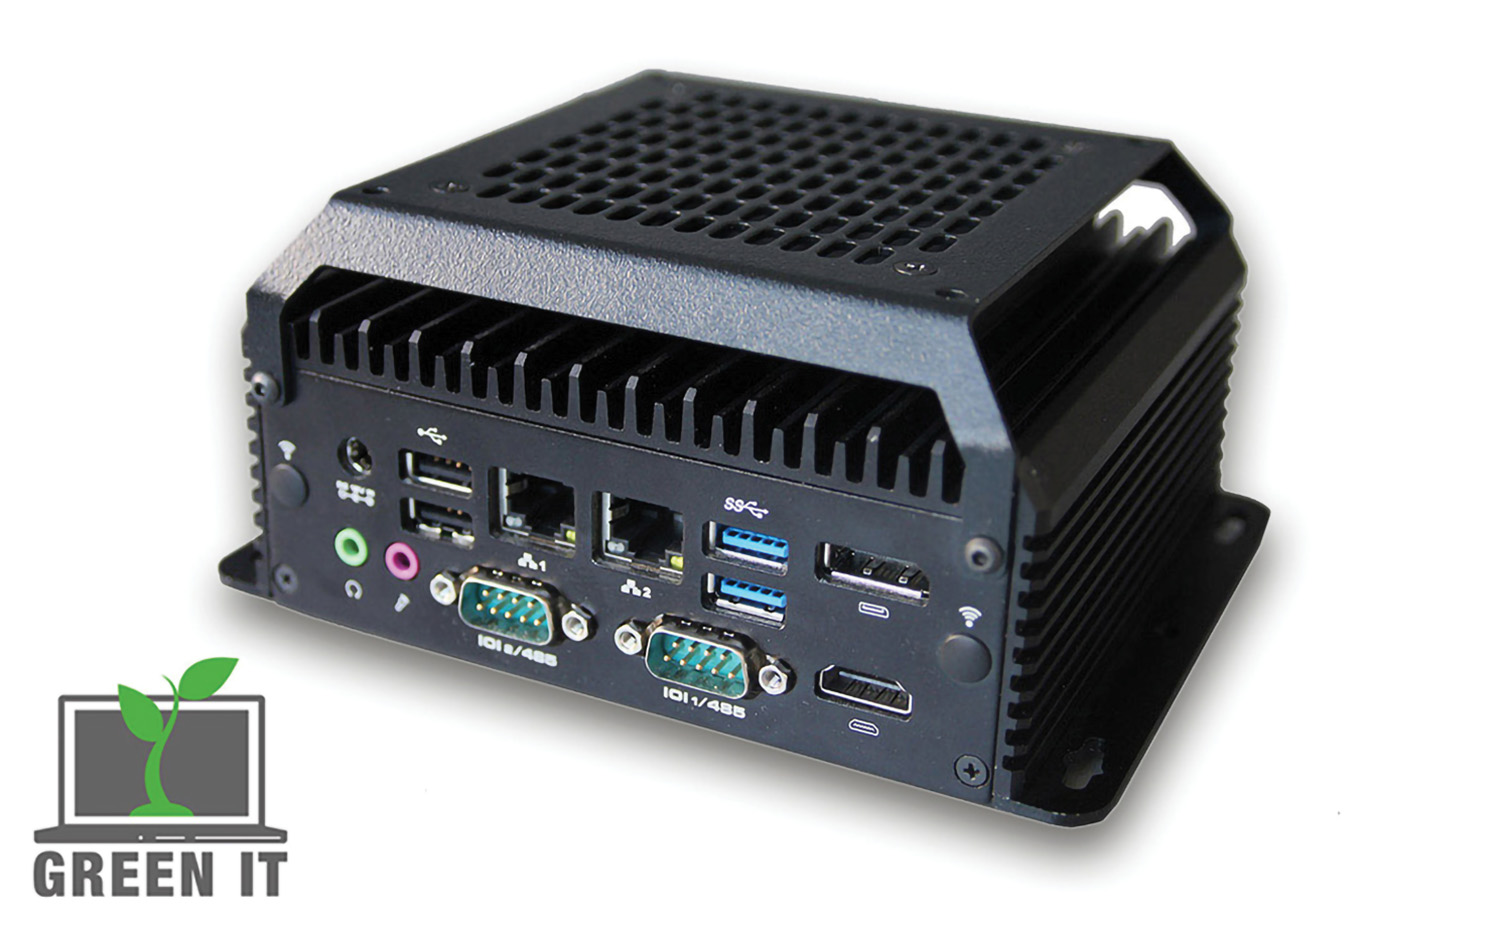 Powerful and economical Green IT embedded system